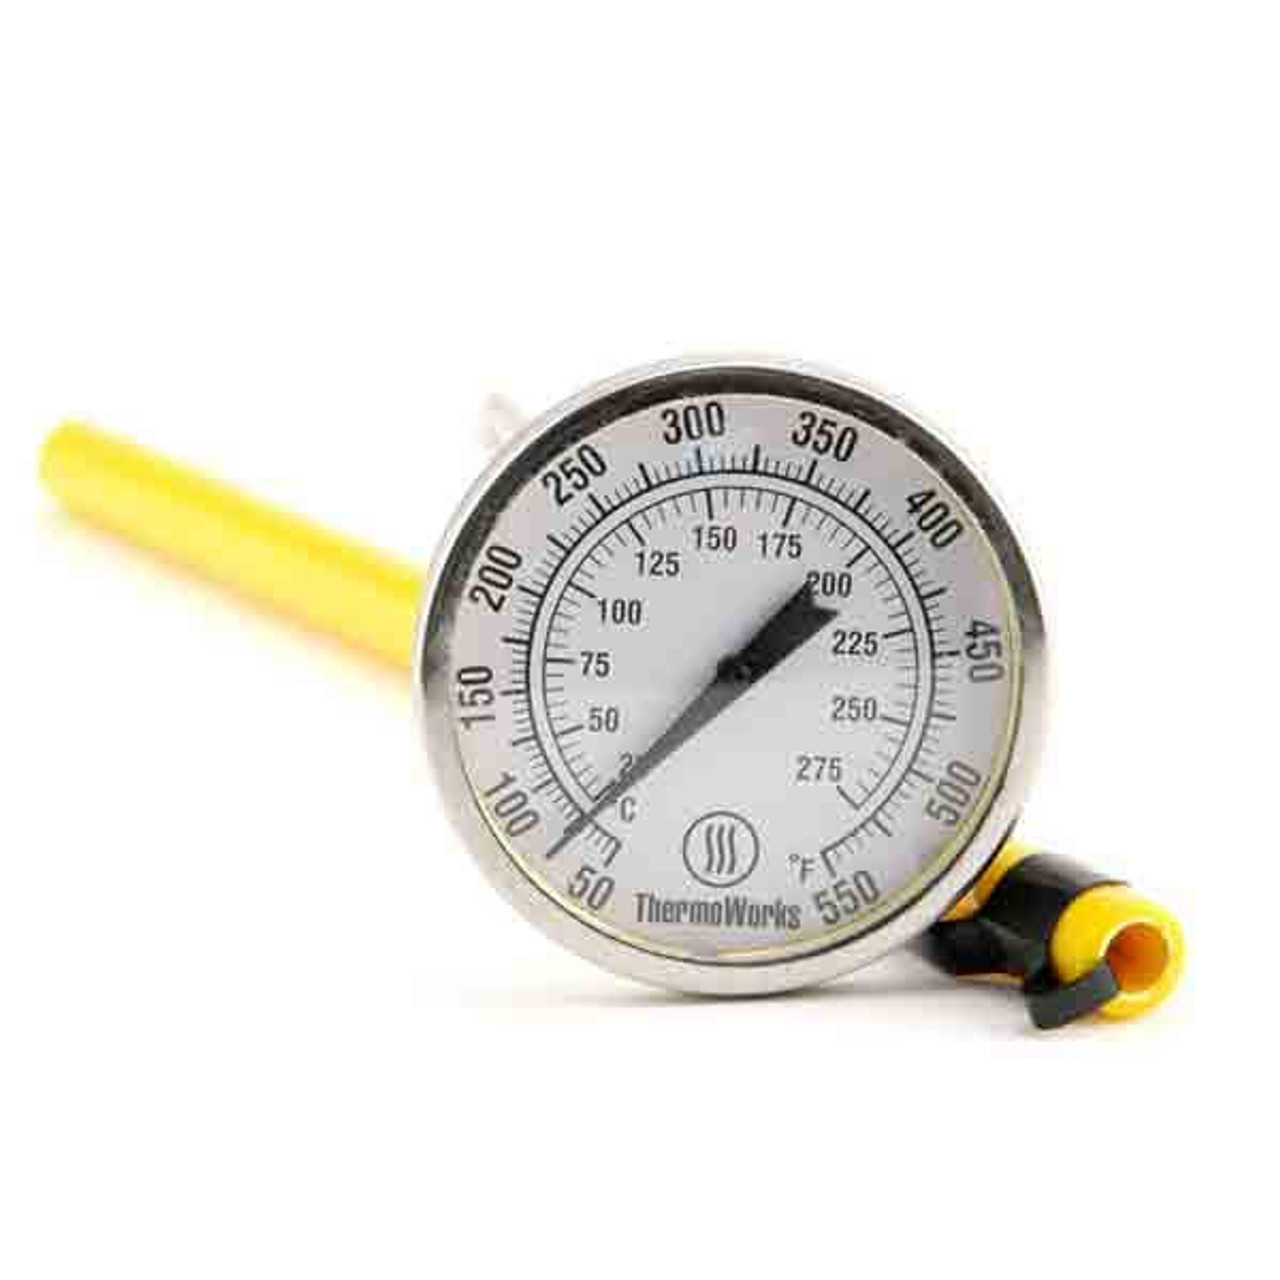 Home Dial Stainless Steel Oven Temperature Gauge Tester Meter